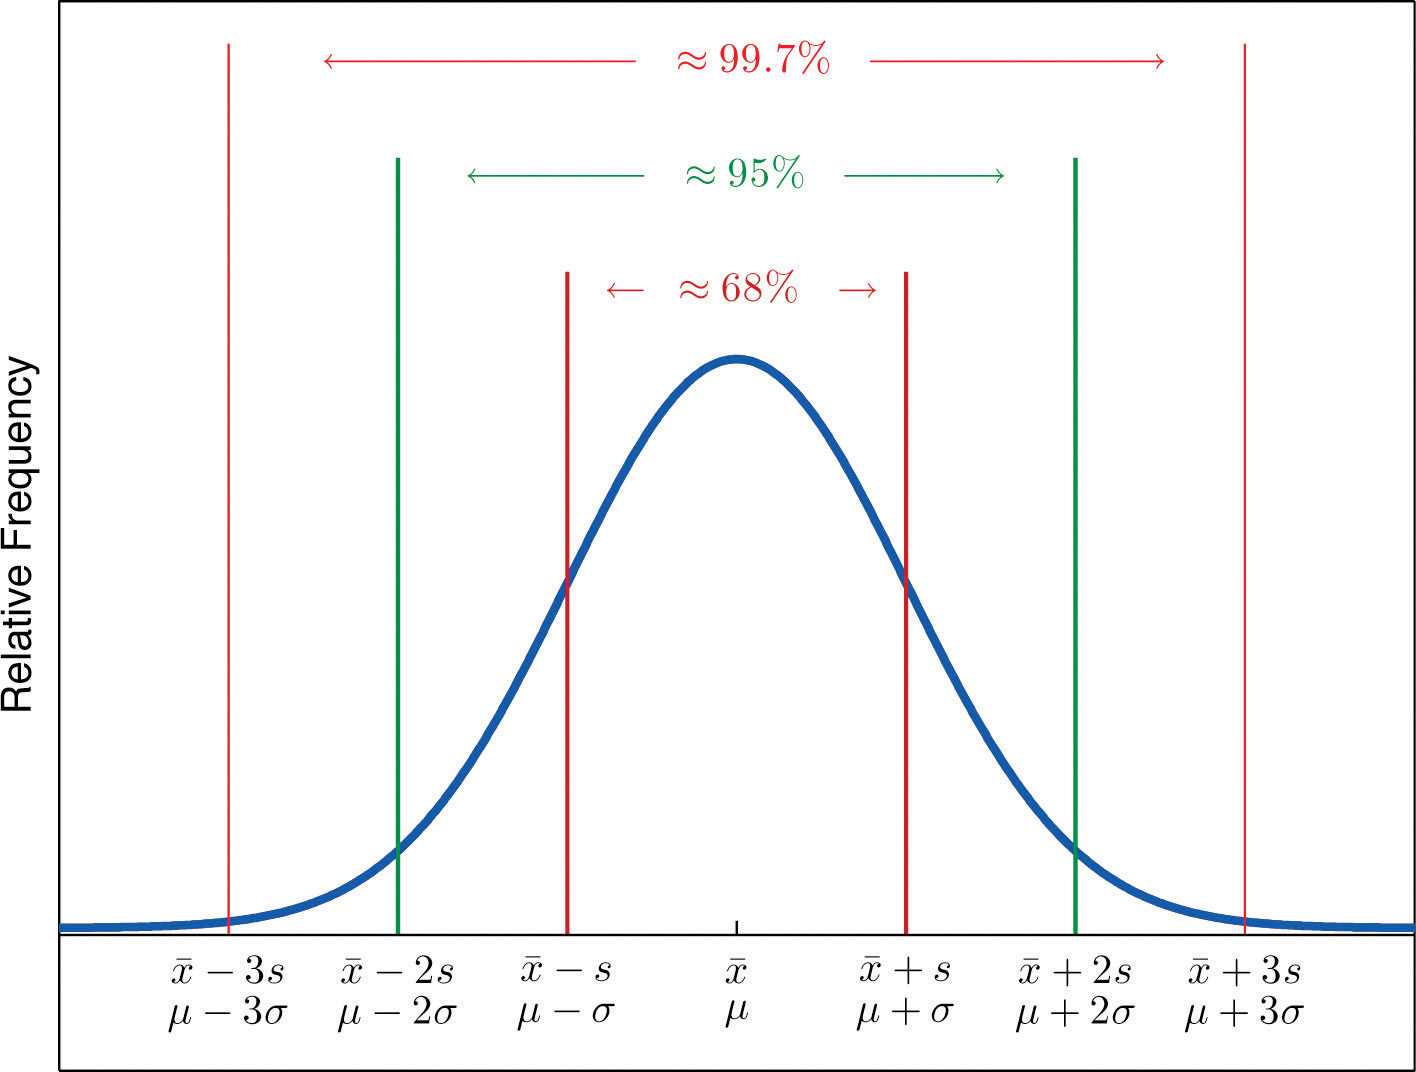 <p>for a specific bell-shaped distribution, about 68% of the observations fall in the interval (μ - σ) to (μ + σ), about 95% fall in the interval (μ - 2σ) to (μ + 2σ), and about 99.7% fall in the interval (μ - 3σ) to (μ + 3σ) (chapter 3)</p>